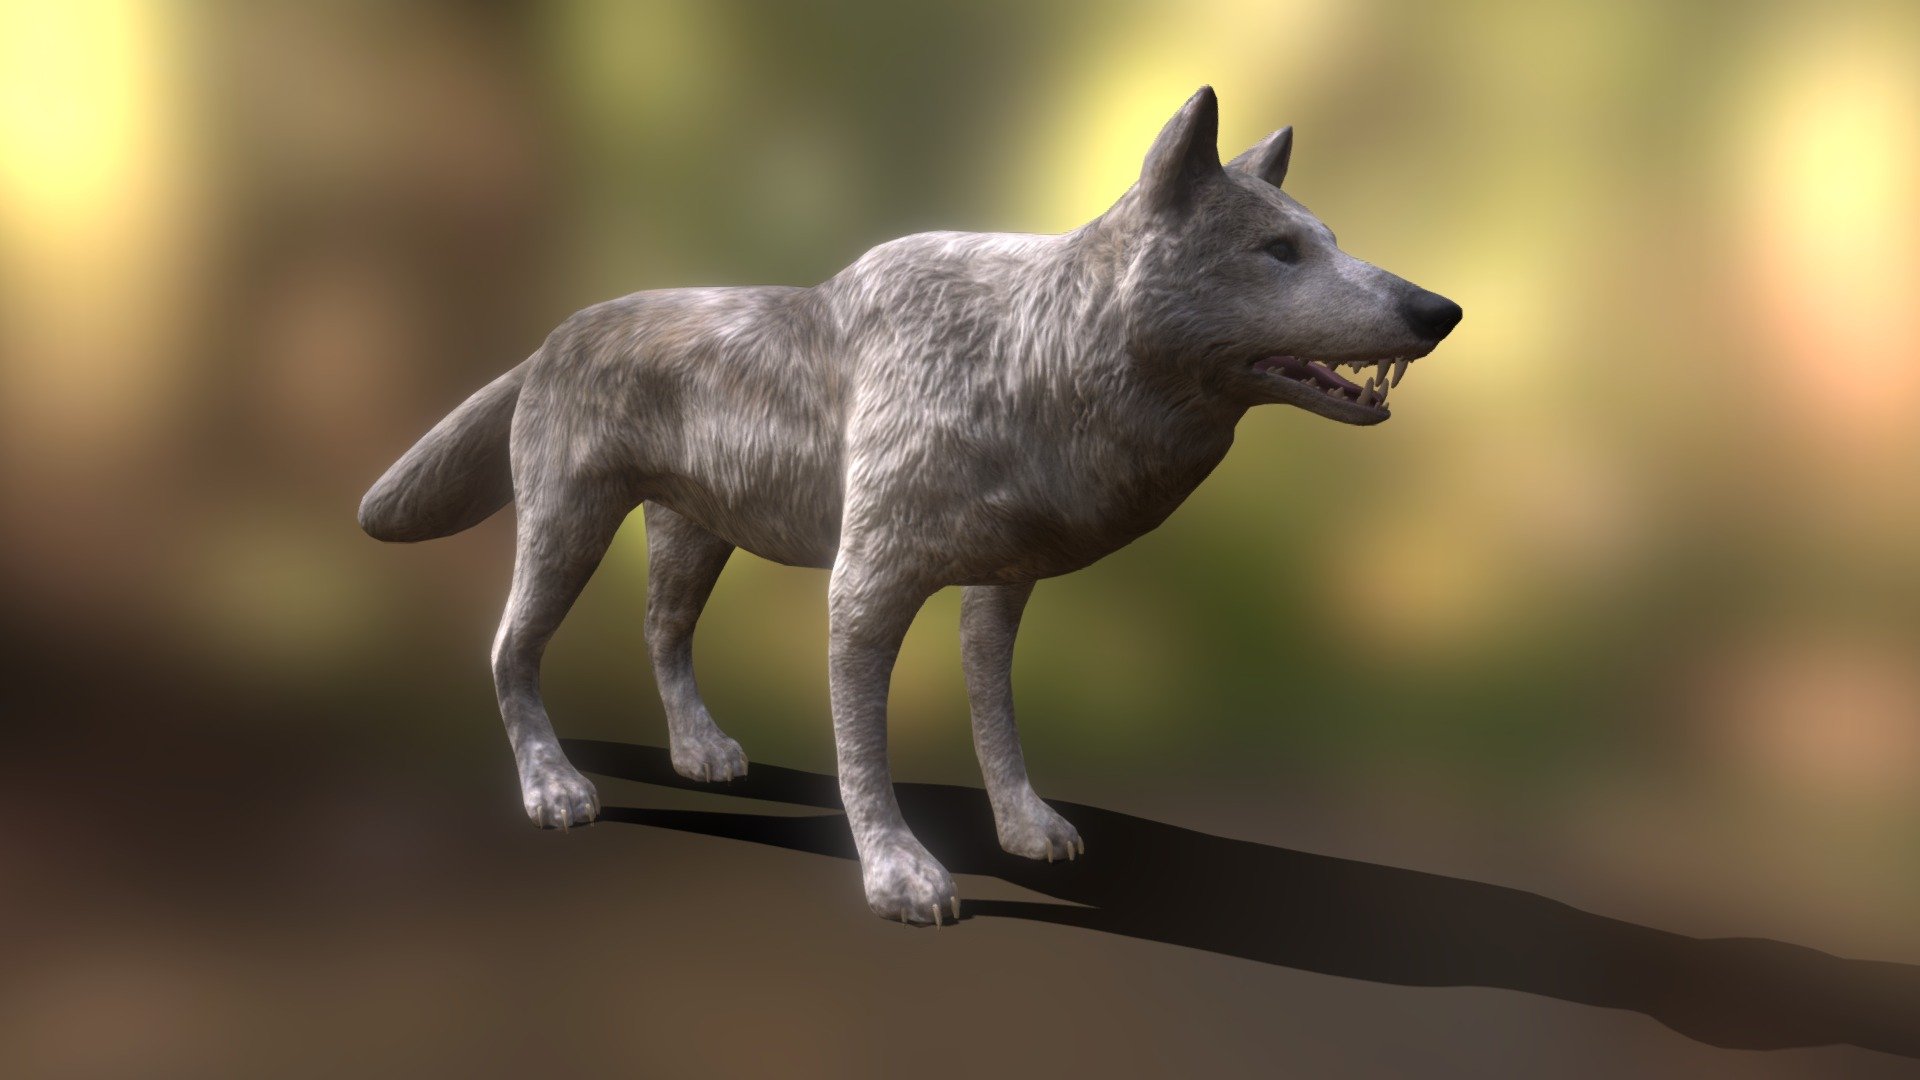 Realistic Wolf 3D Model:
- Lowpoly (Tris: 14244 -  Verts: 7224)
- Game ready with Unity Package, optimized for VR/AR apps
- Texture Maps includes: Basecolor, Normal
- Model is created in Maya, other files supported includes: Blender, FBX, Glb/Gltf, Unity 

10 animations:

- 5-305: idleLookAround
- 310-370: idleNormal
- 375-460:howl
- 466-495: walk
- 506-529: run
- 536-559: runBite
- 566-586: standBite
- 591-613: getHit
- 620-682: death
- 691-710: dead - Lowpoly Wolf Rigged and Animated for VR AR Games - Buy Royalty Free 3D model by Dzung Dinh (@hugechimera) 3d model